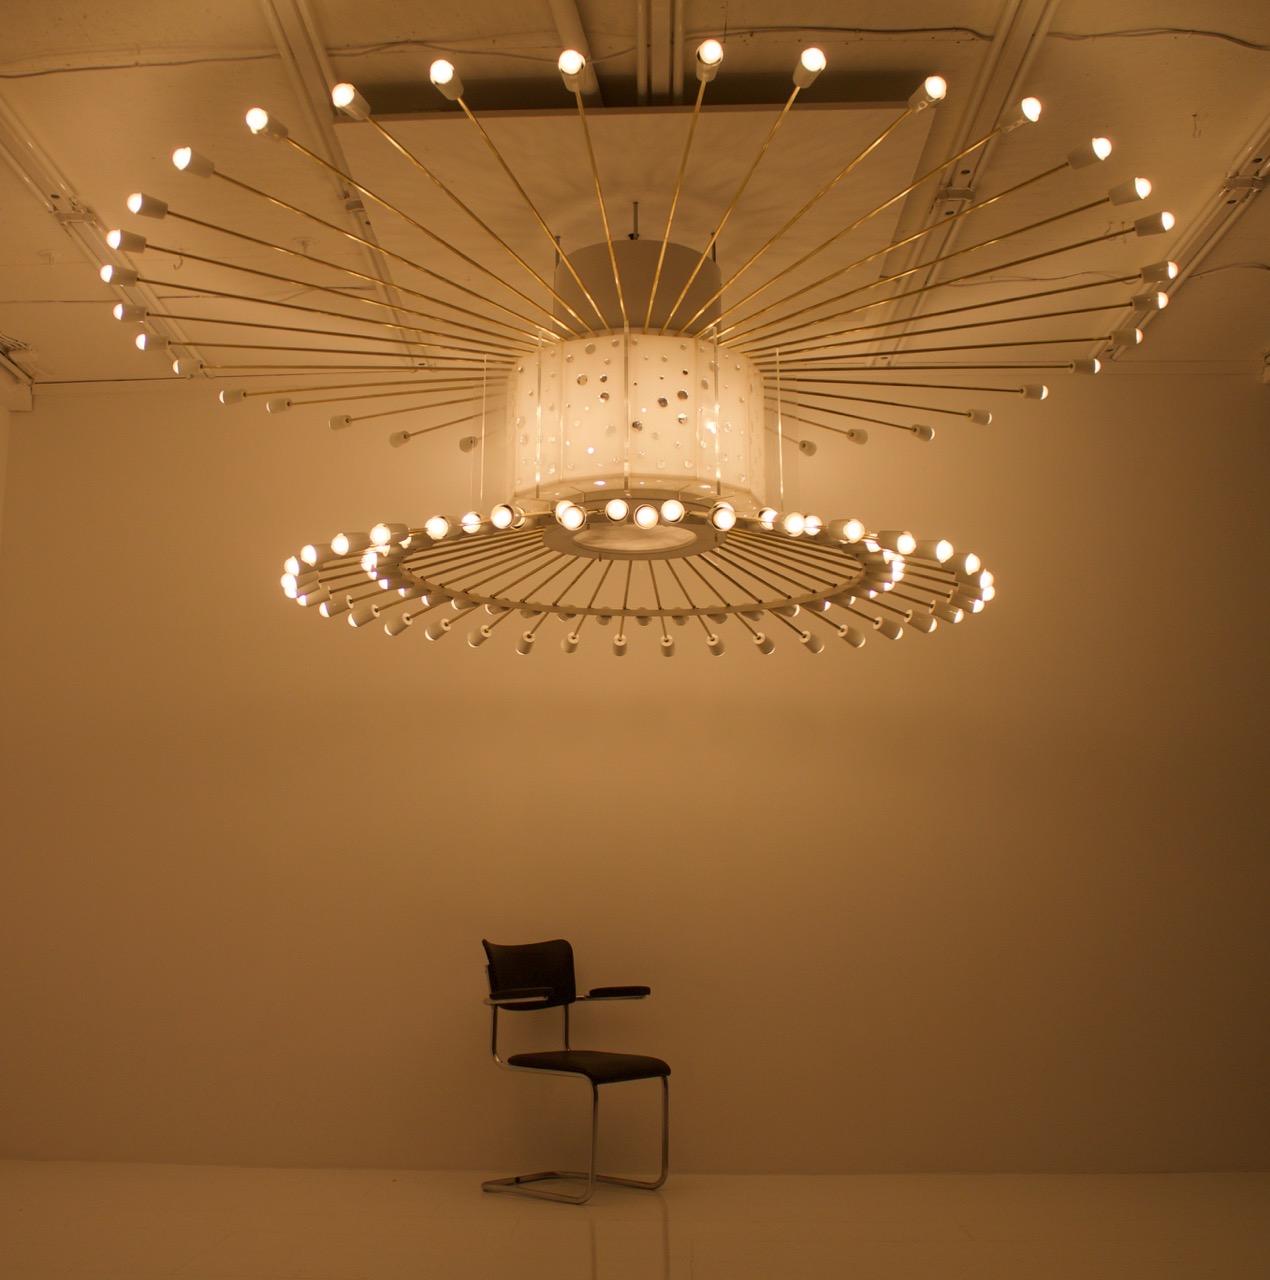 Extraordinary and very large impressive “Sputnik ceiling lamp” from the 1950s. 
Built to order for a large ballroom in Frankfurt, Germany.
132 sockets for E27 light bulbs. 108 light bulbs are used in the sockets on the rings, 24 light bulbs in the